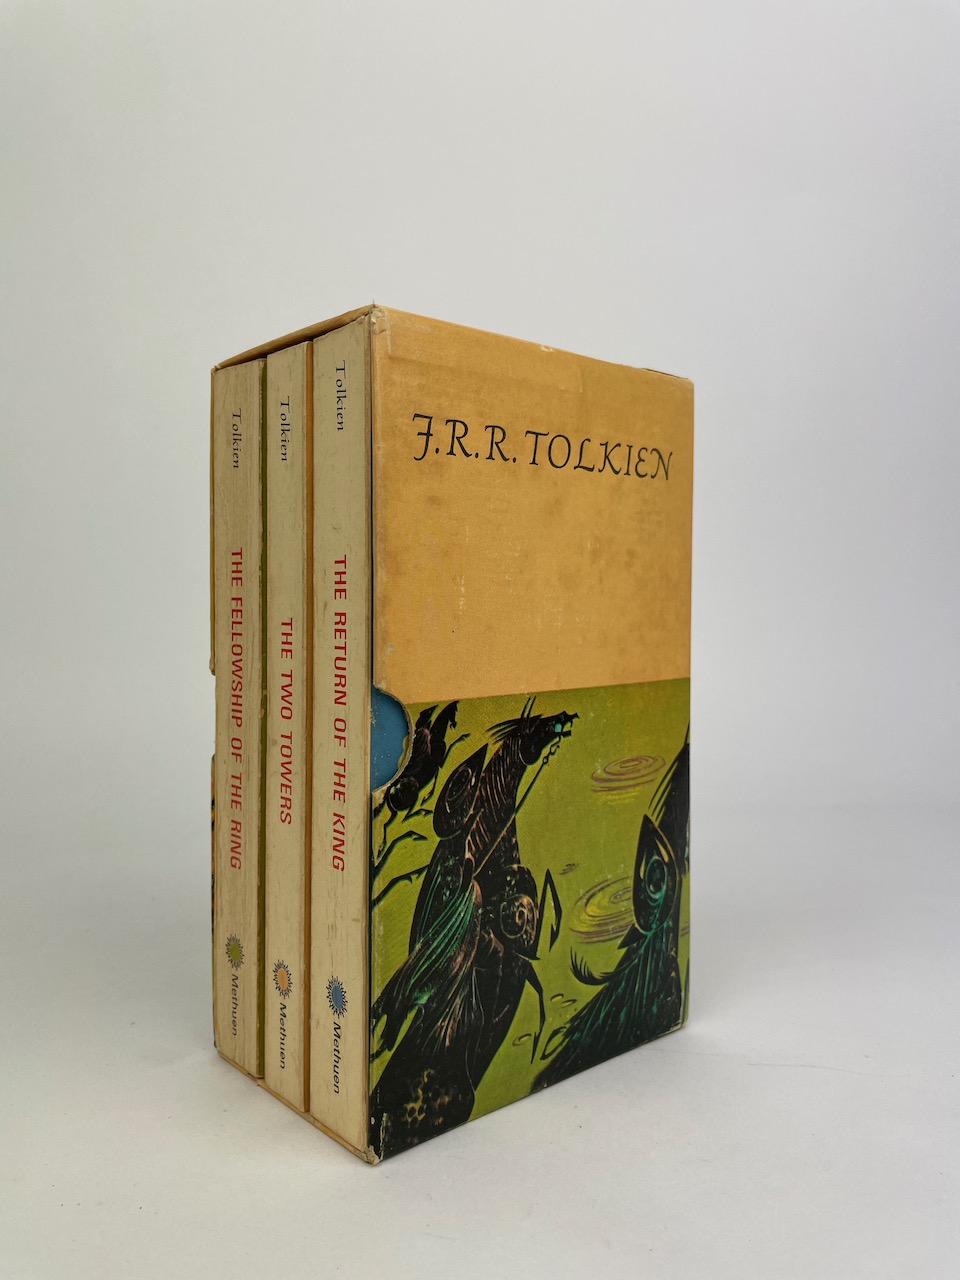 J.R.R. Tolkien, The Lord of the Rings in slipcase released in 1973 by Methuen Publications 4